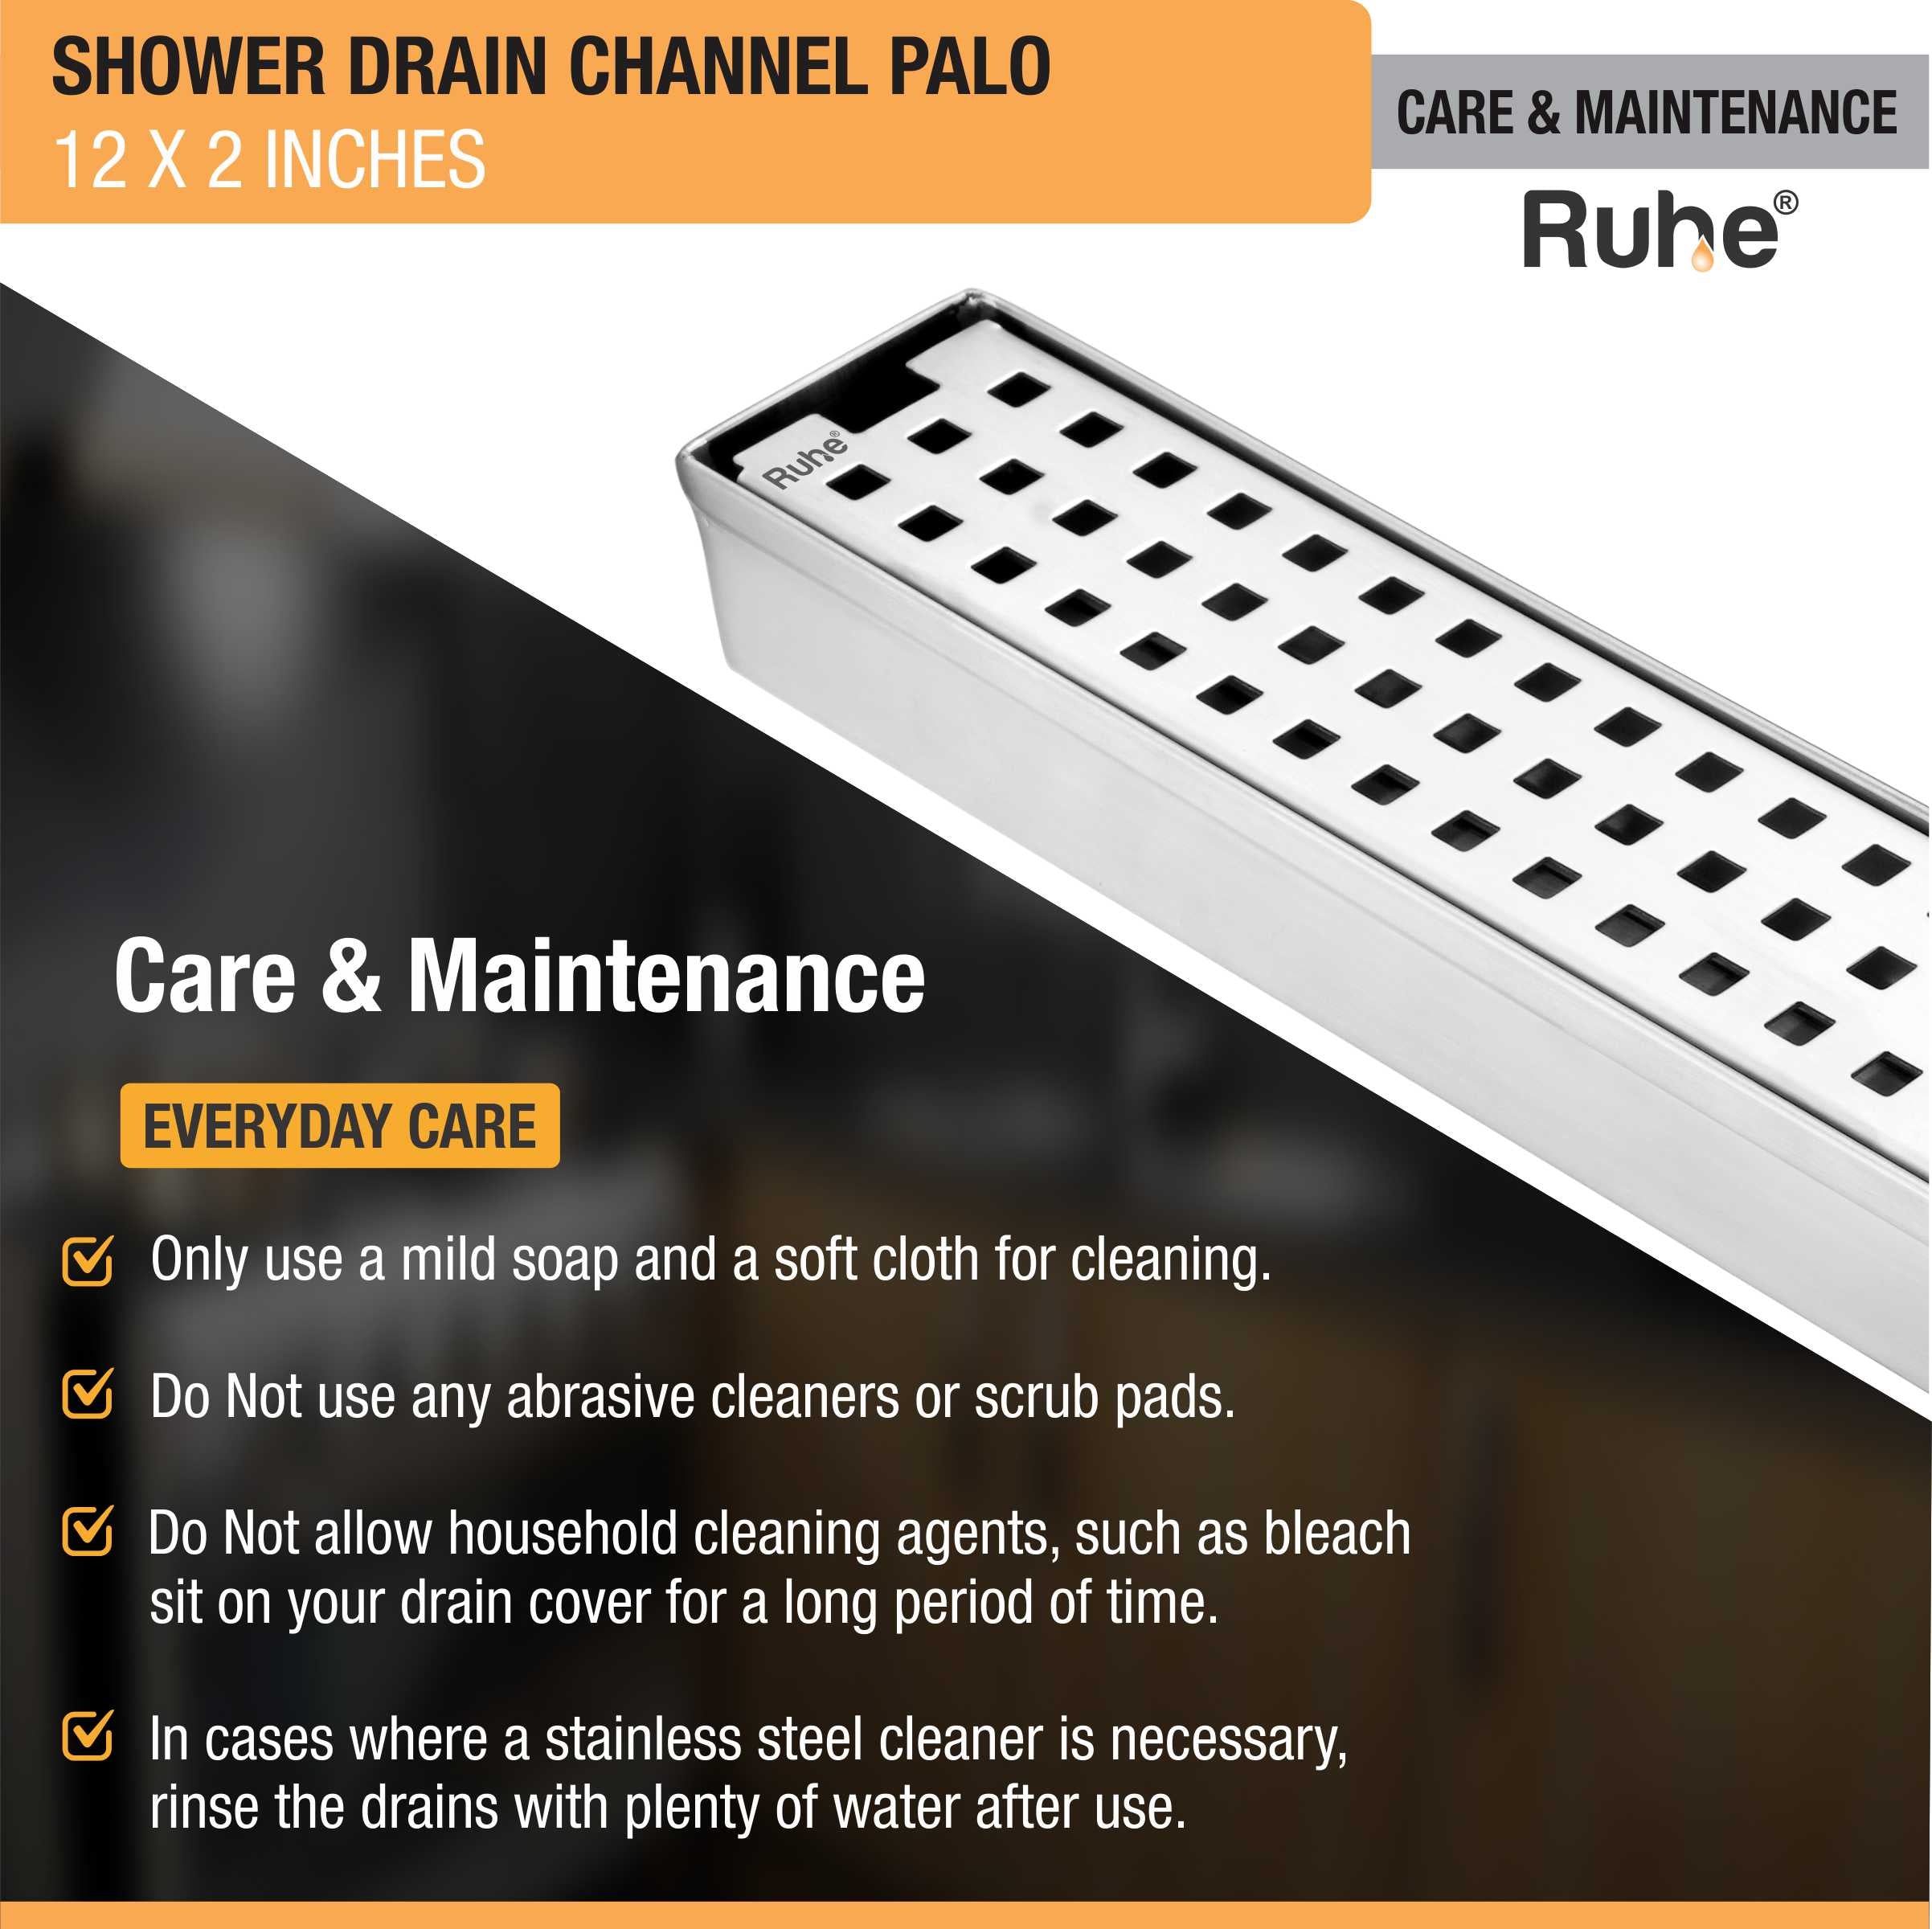 Palo Shower Drain Channel (12 X 2 Inches) care and maintenance